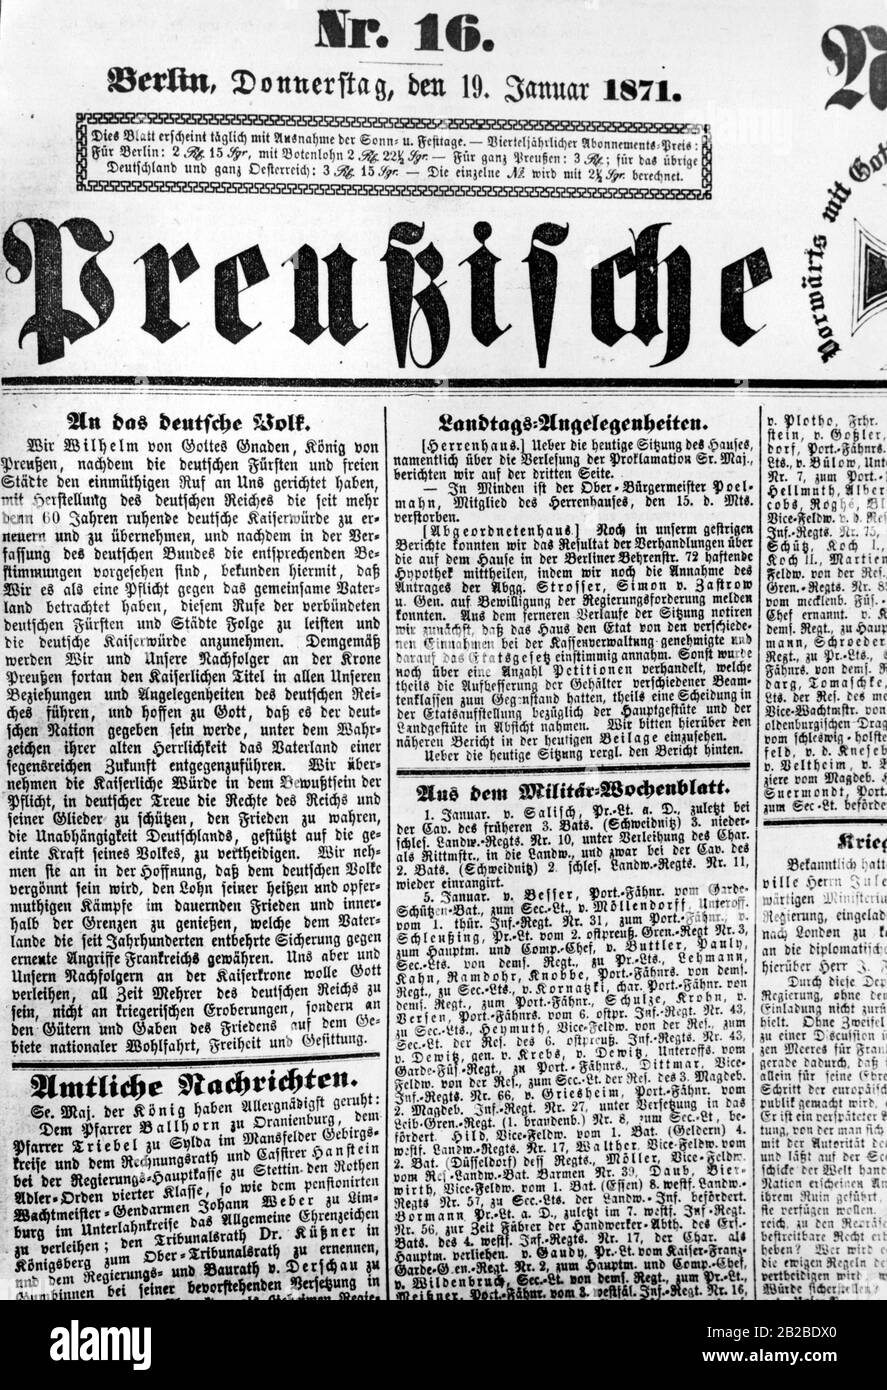 Newspaper report on the proclamation of the Prussian King Wilhelm to German Emperor in Versailles. Stock Photo